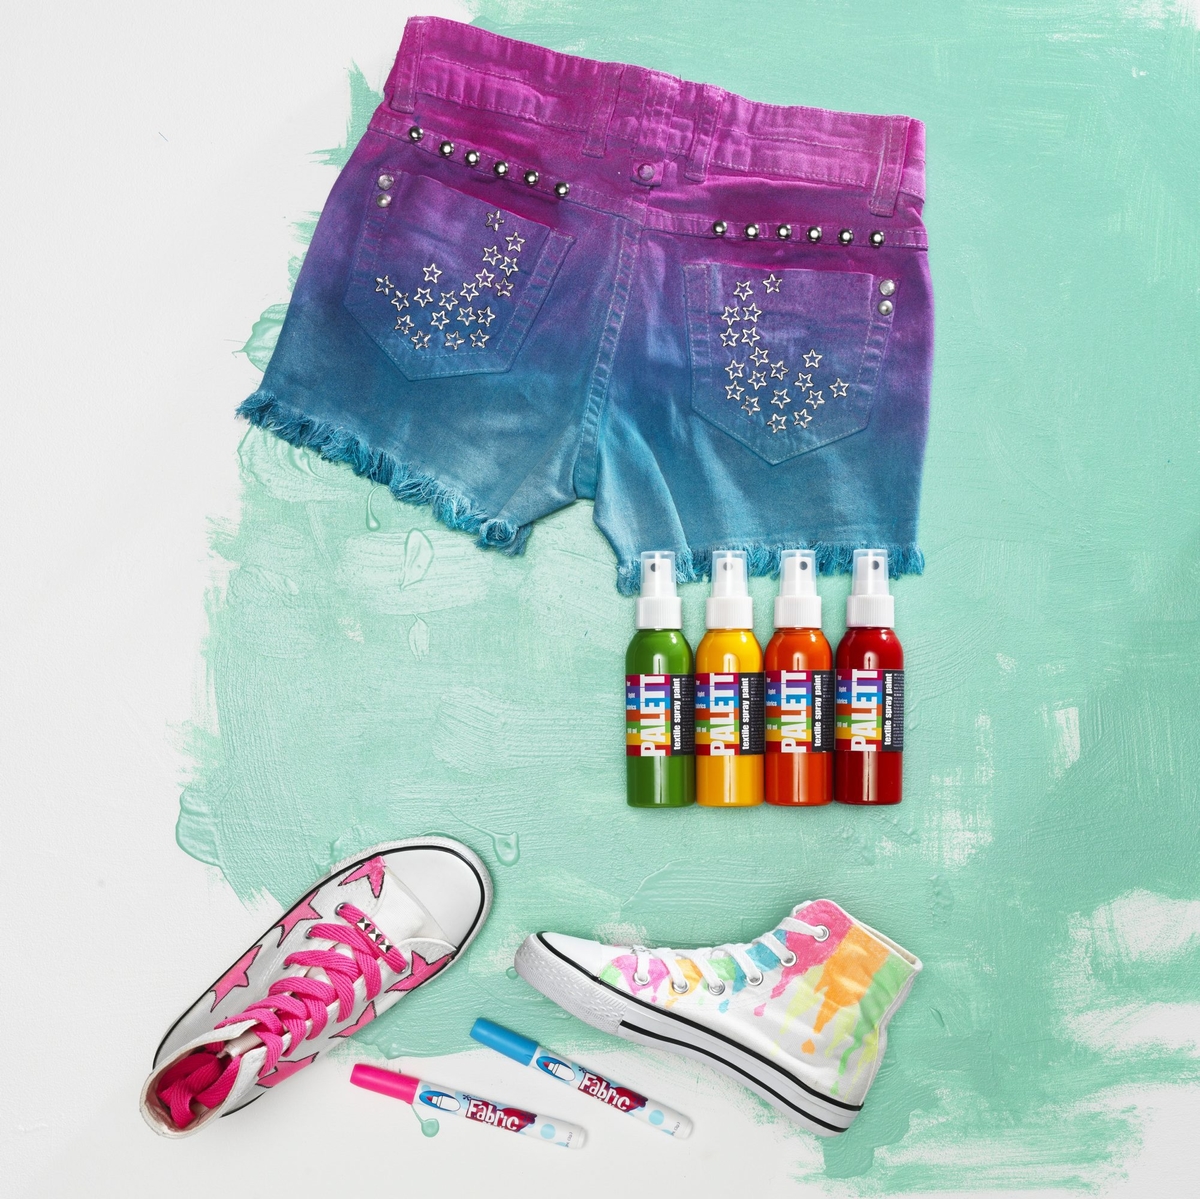 Design your own summer shorts!